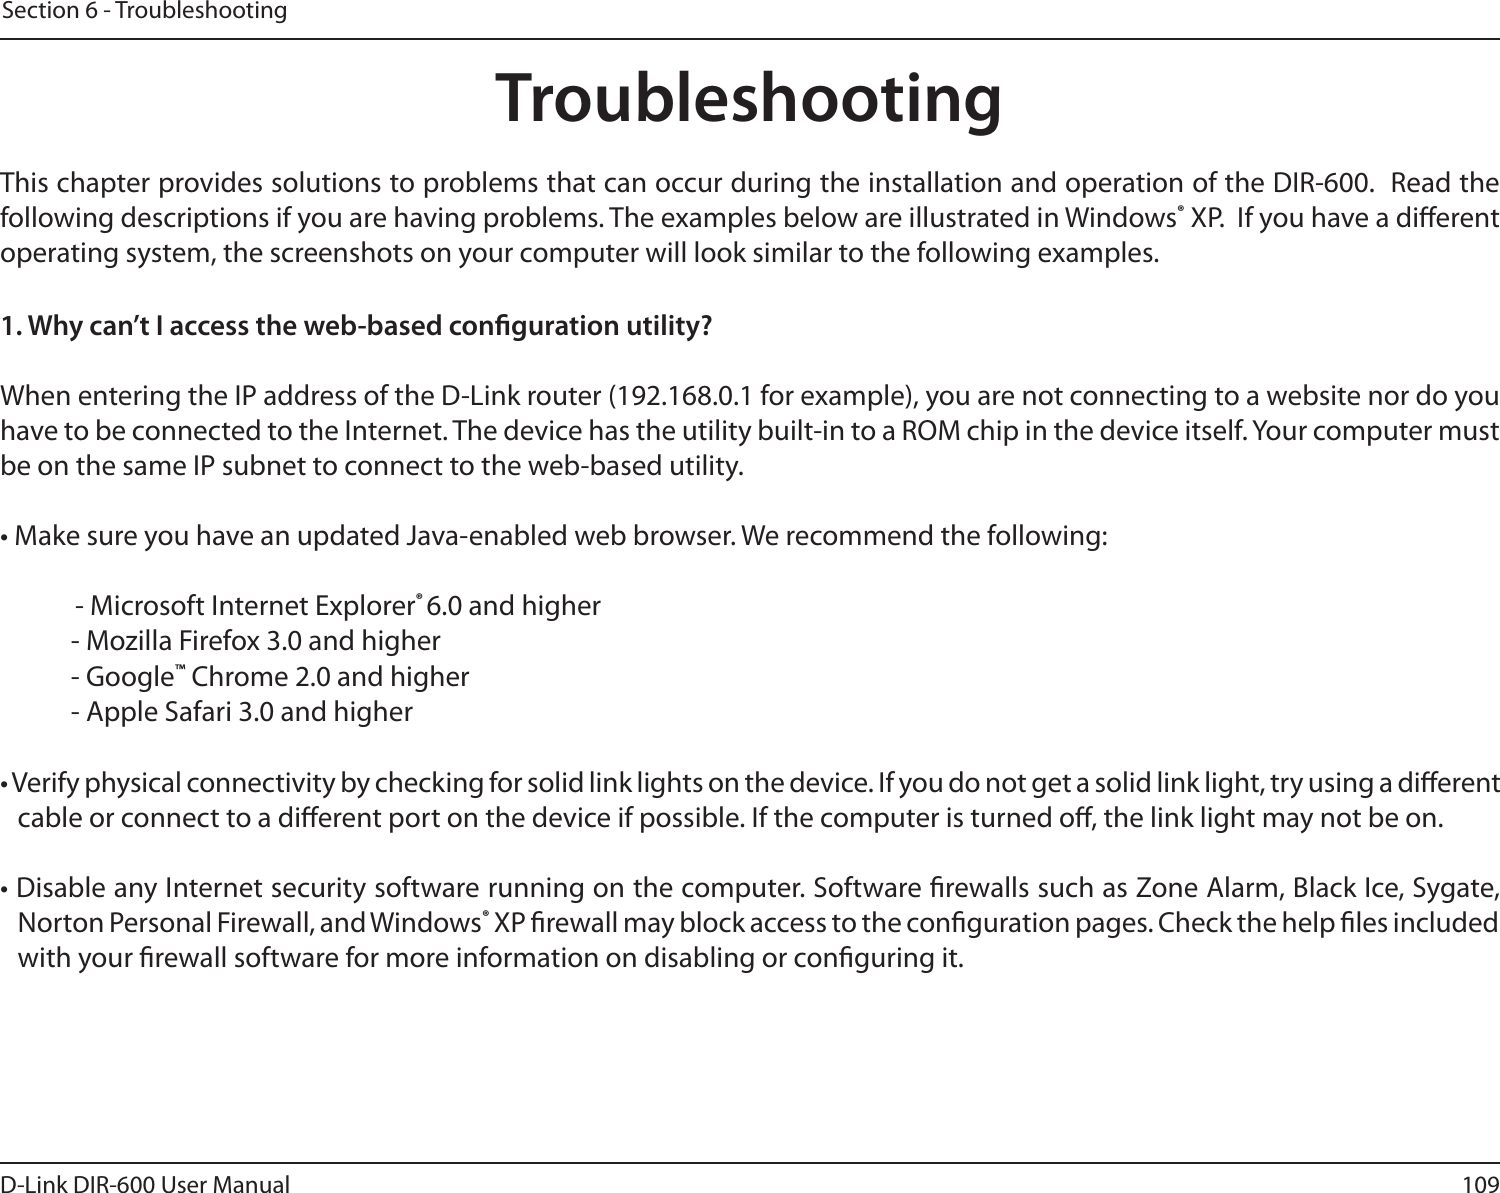 109D-Link DIR-600 User ManualSection 6 - TroubleshootingTroubleshootingThis chapter provides solutions to problems that can occur during the installation and operation of the DIR-600.  Read the following descriptions if you are having problems. The examples below are illustrated in Windows® XP.  If you have a dierent operating system, the screenshots on your computer will look similar to the following examples.1. Why can’t I access the web-based conguration utility?When entering the IP address of the D-Link router (192.168.0.1 for example), you are not connecting to a website nor do you have to be connected to the Internet. The device has the utility built-in to a ROM chip in the device itself. Your computer must be on the same IP subnet to connect to the web-based utility. • Make sure you have an updated Java-enabled web browser. We recommend the following:    - Microsoft Internet Explorer® 6.0 and higher- Mozilla Firefox 3.0 and higher- Google™ Chrome 2.0 and higher- Apple Safari 3.0 and higher• Verify physical connectivity by checking for solid link lights on the device. If you do not get a solid link light, try using a dierent cable or connect to a dierent port on the device if possible. If the computer is turned o, the link light may not be on.• Disable any Internet security software running on the computer. Software rewalls such as Zone Alarm, Black Ice, Sygate, Norton Personal Firewall, and Windows® XP rewall may block access to the conguration pages. Check the help les included with your rewall software for more information on disabling or conguring it.